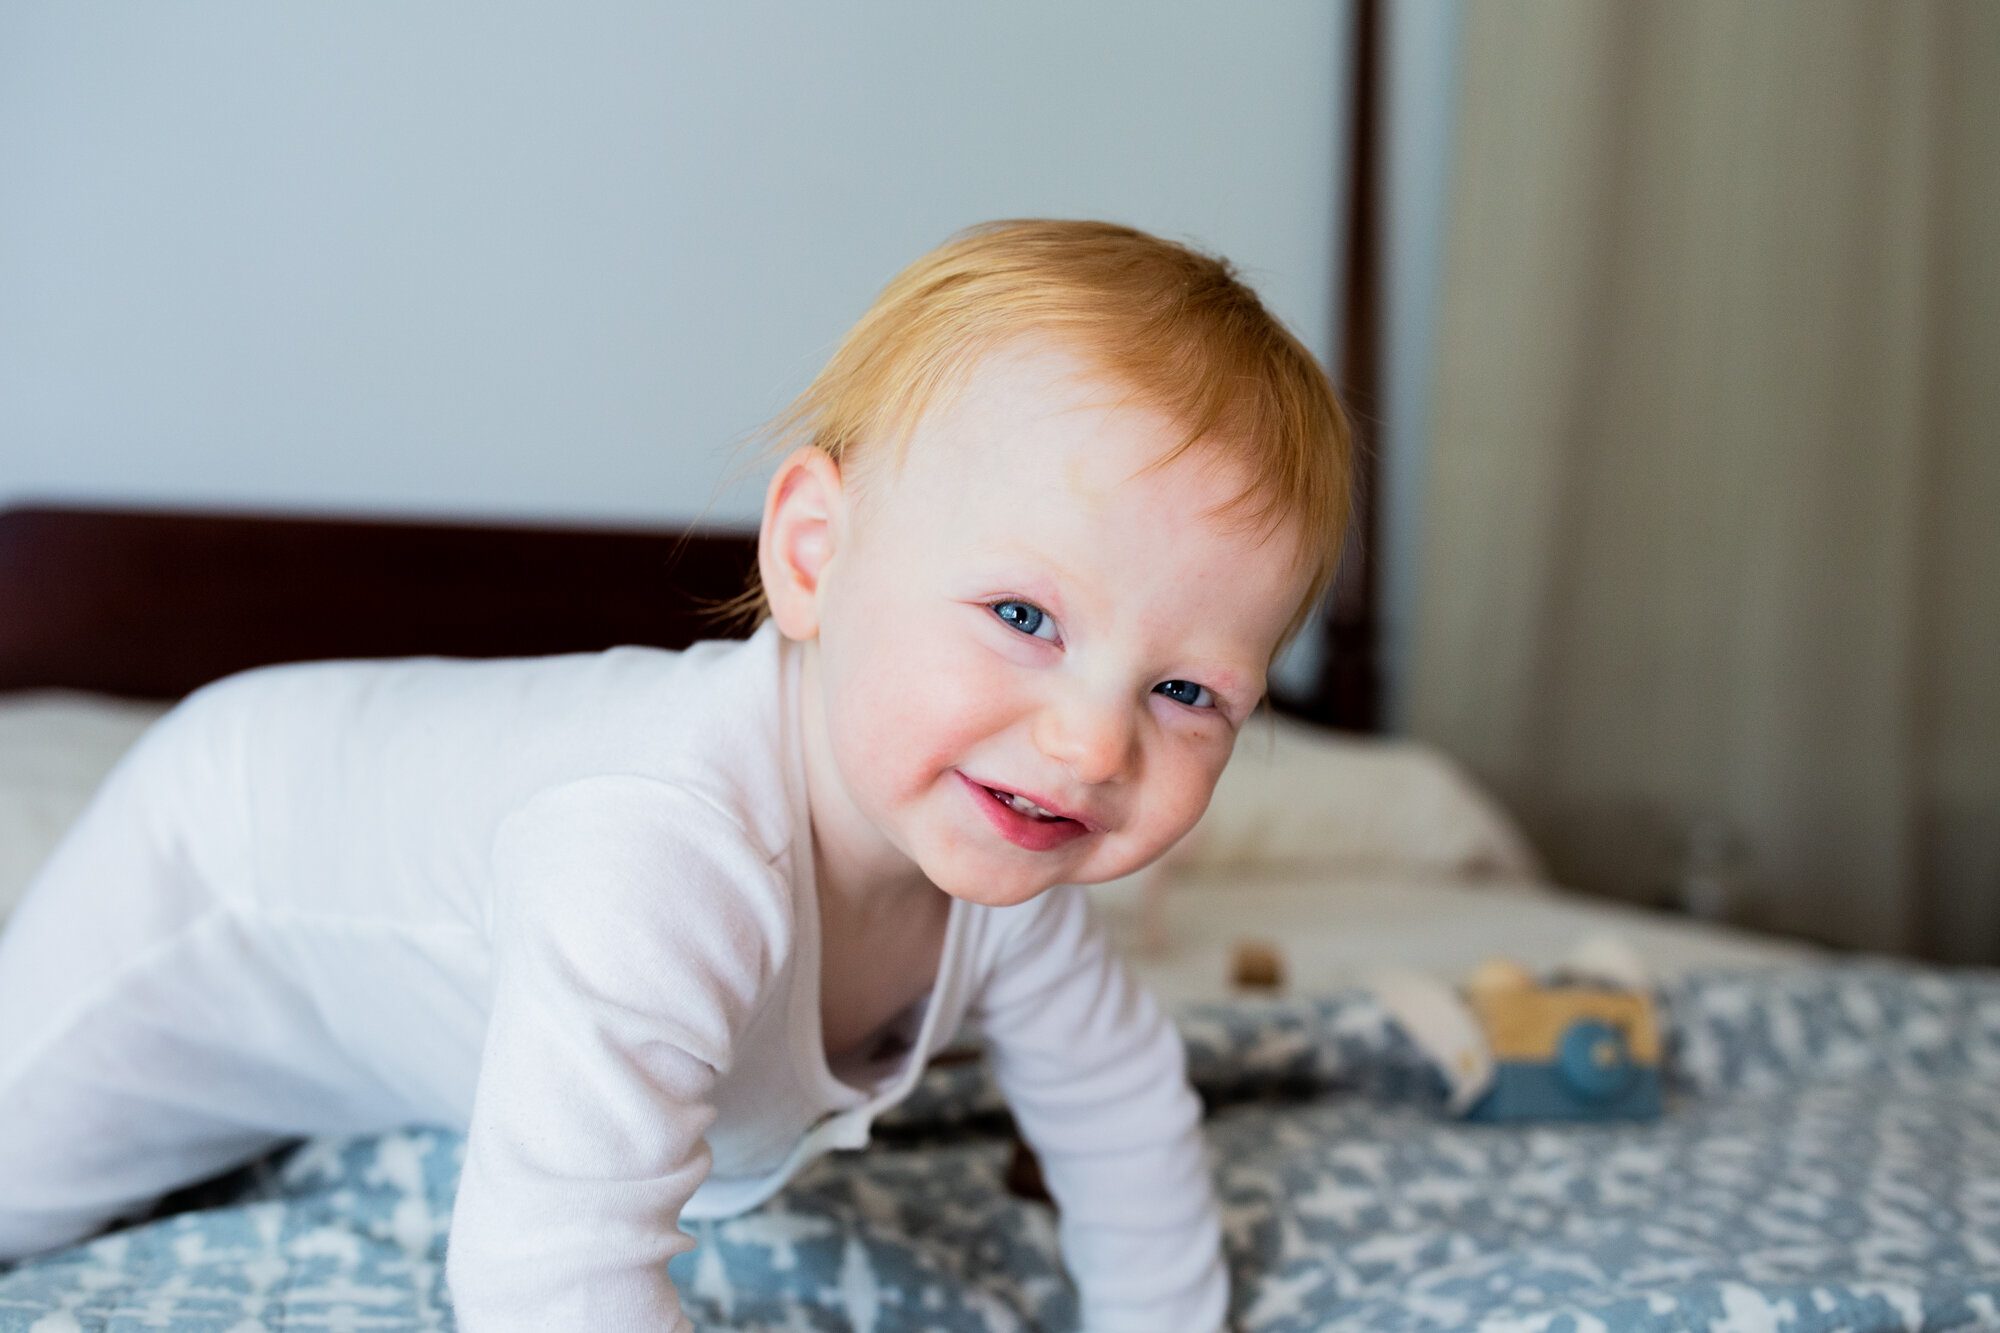 Shreveport Lifestyle Baby &amp; Toddler Photographer | Bossier City Lifestyle Baby &amp; Toddler Photographer | Louisiana Lifestyle Baby &amp; Toddler Photographer | Pajamas in Bed 1 yr Portraits